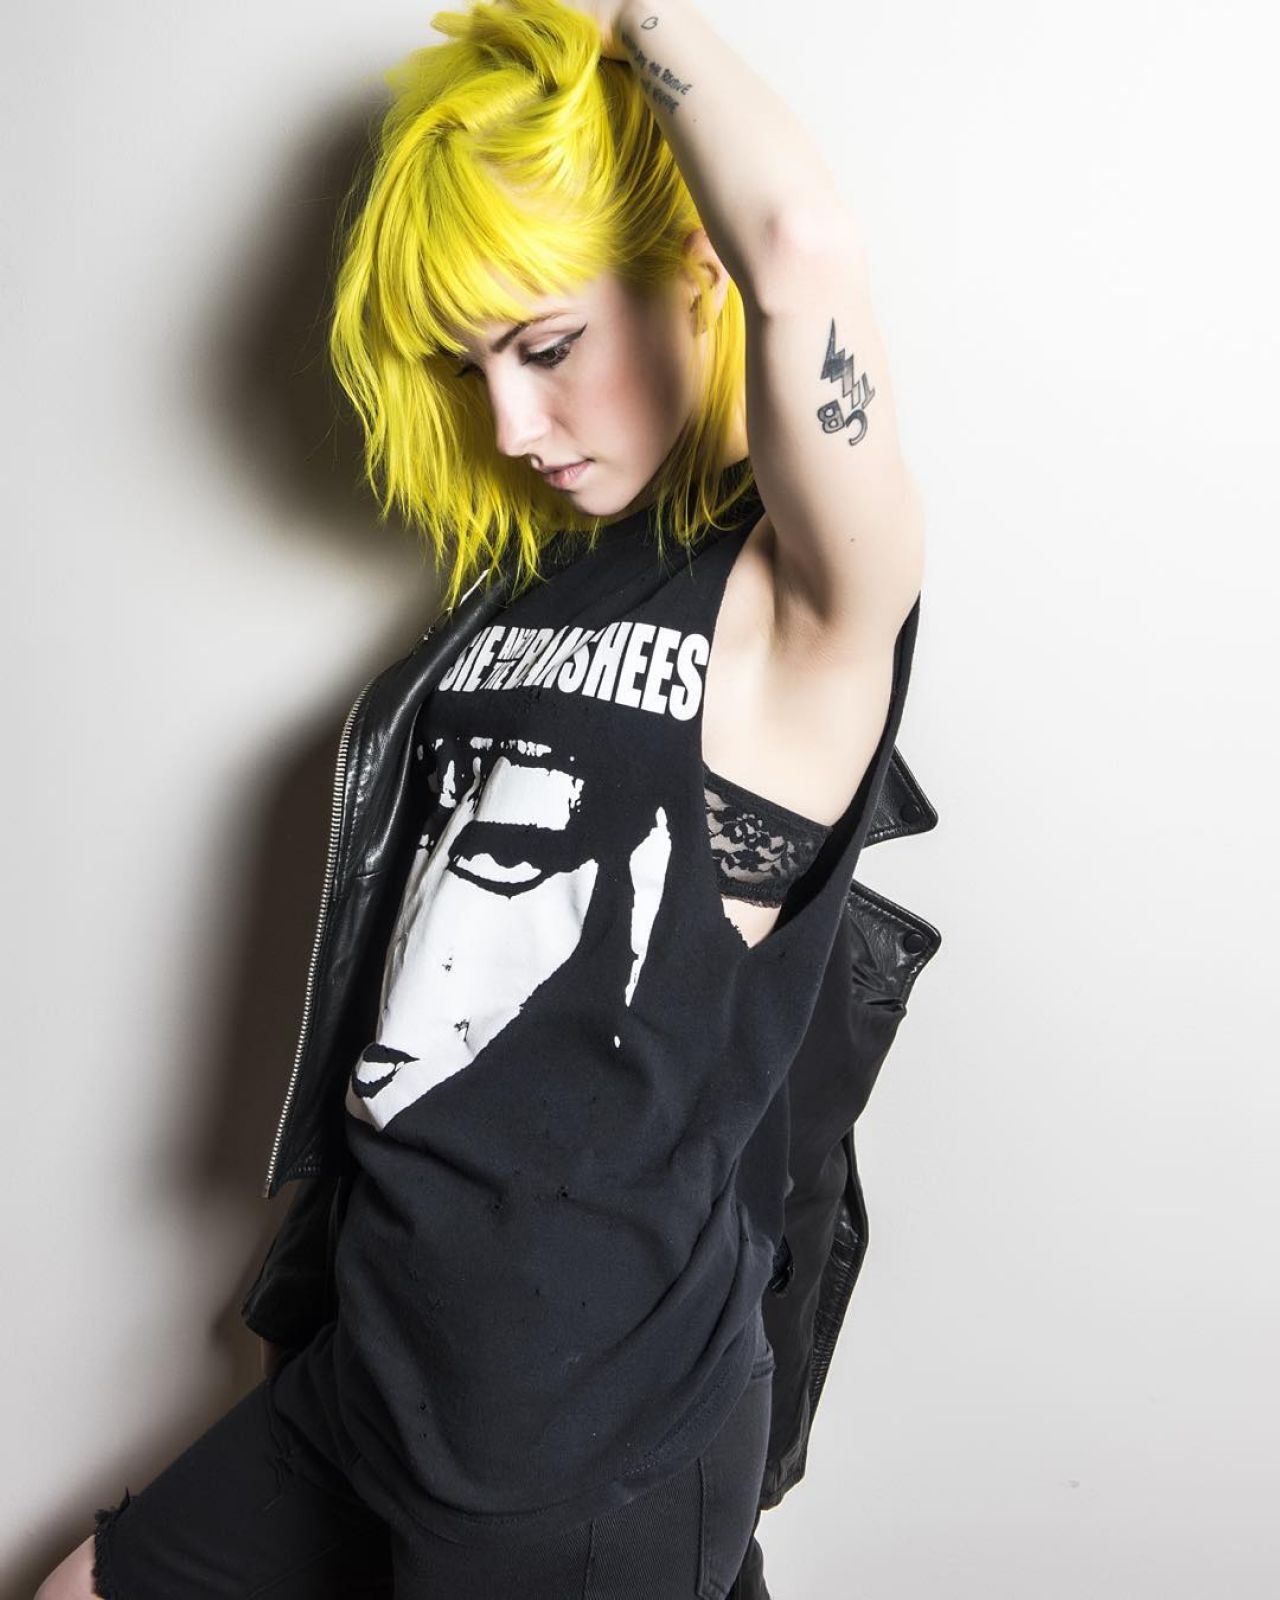 527274 free high resolution wallpaper hayley williams  Rare Gallery HD  Wallpapers